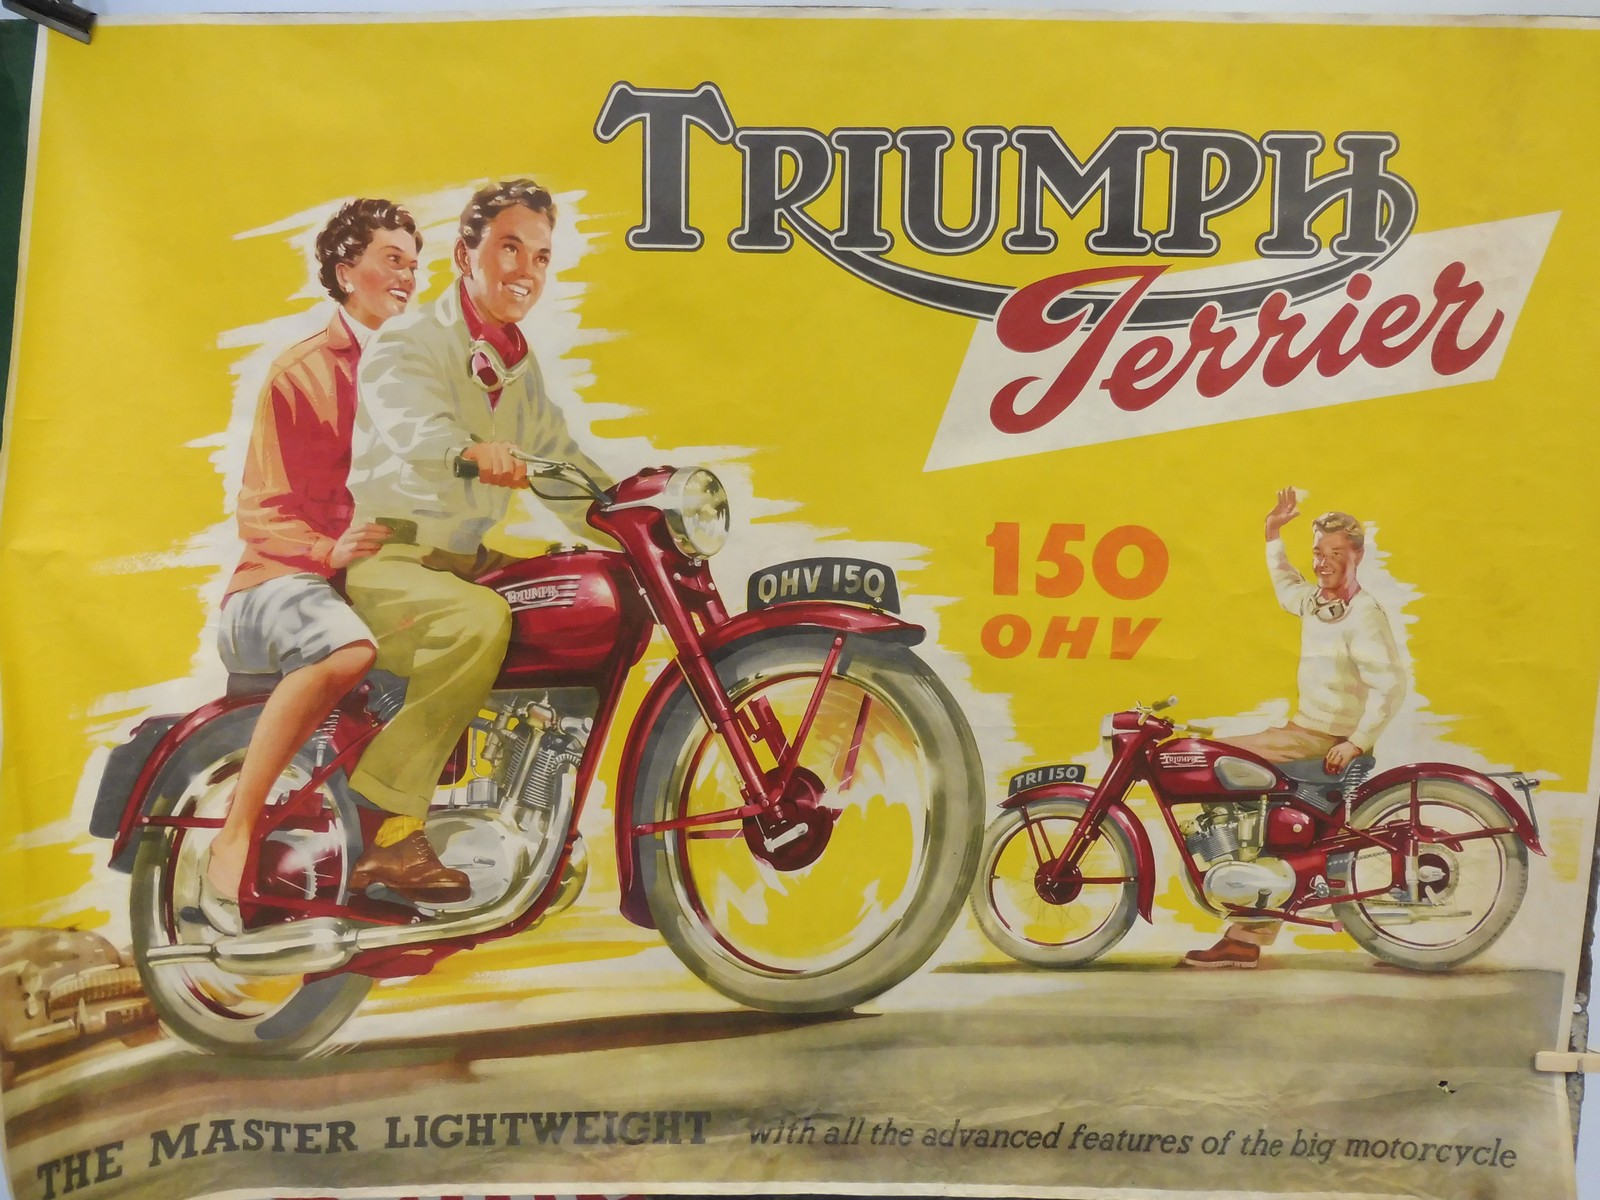 A rare Triumph Terrier motorcycle pictorial poster depicting a 150 ohv Terrier, 39 x 28 1/2".